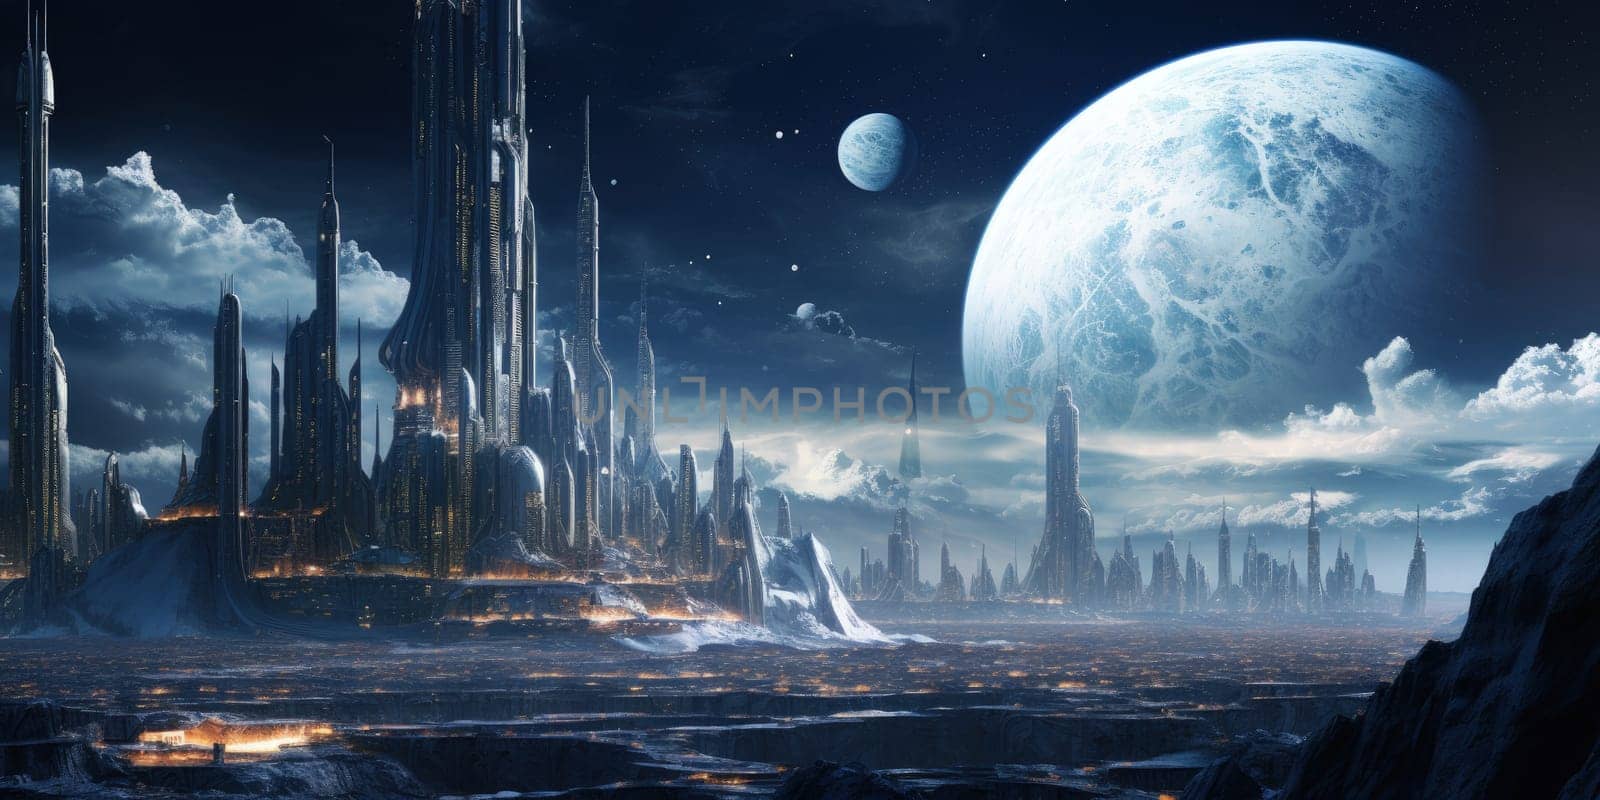 Alien cityscape sprawling across the lunar surface, with towering structures, bioluminescent pathways and unique architectural designs by Kadula